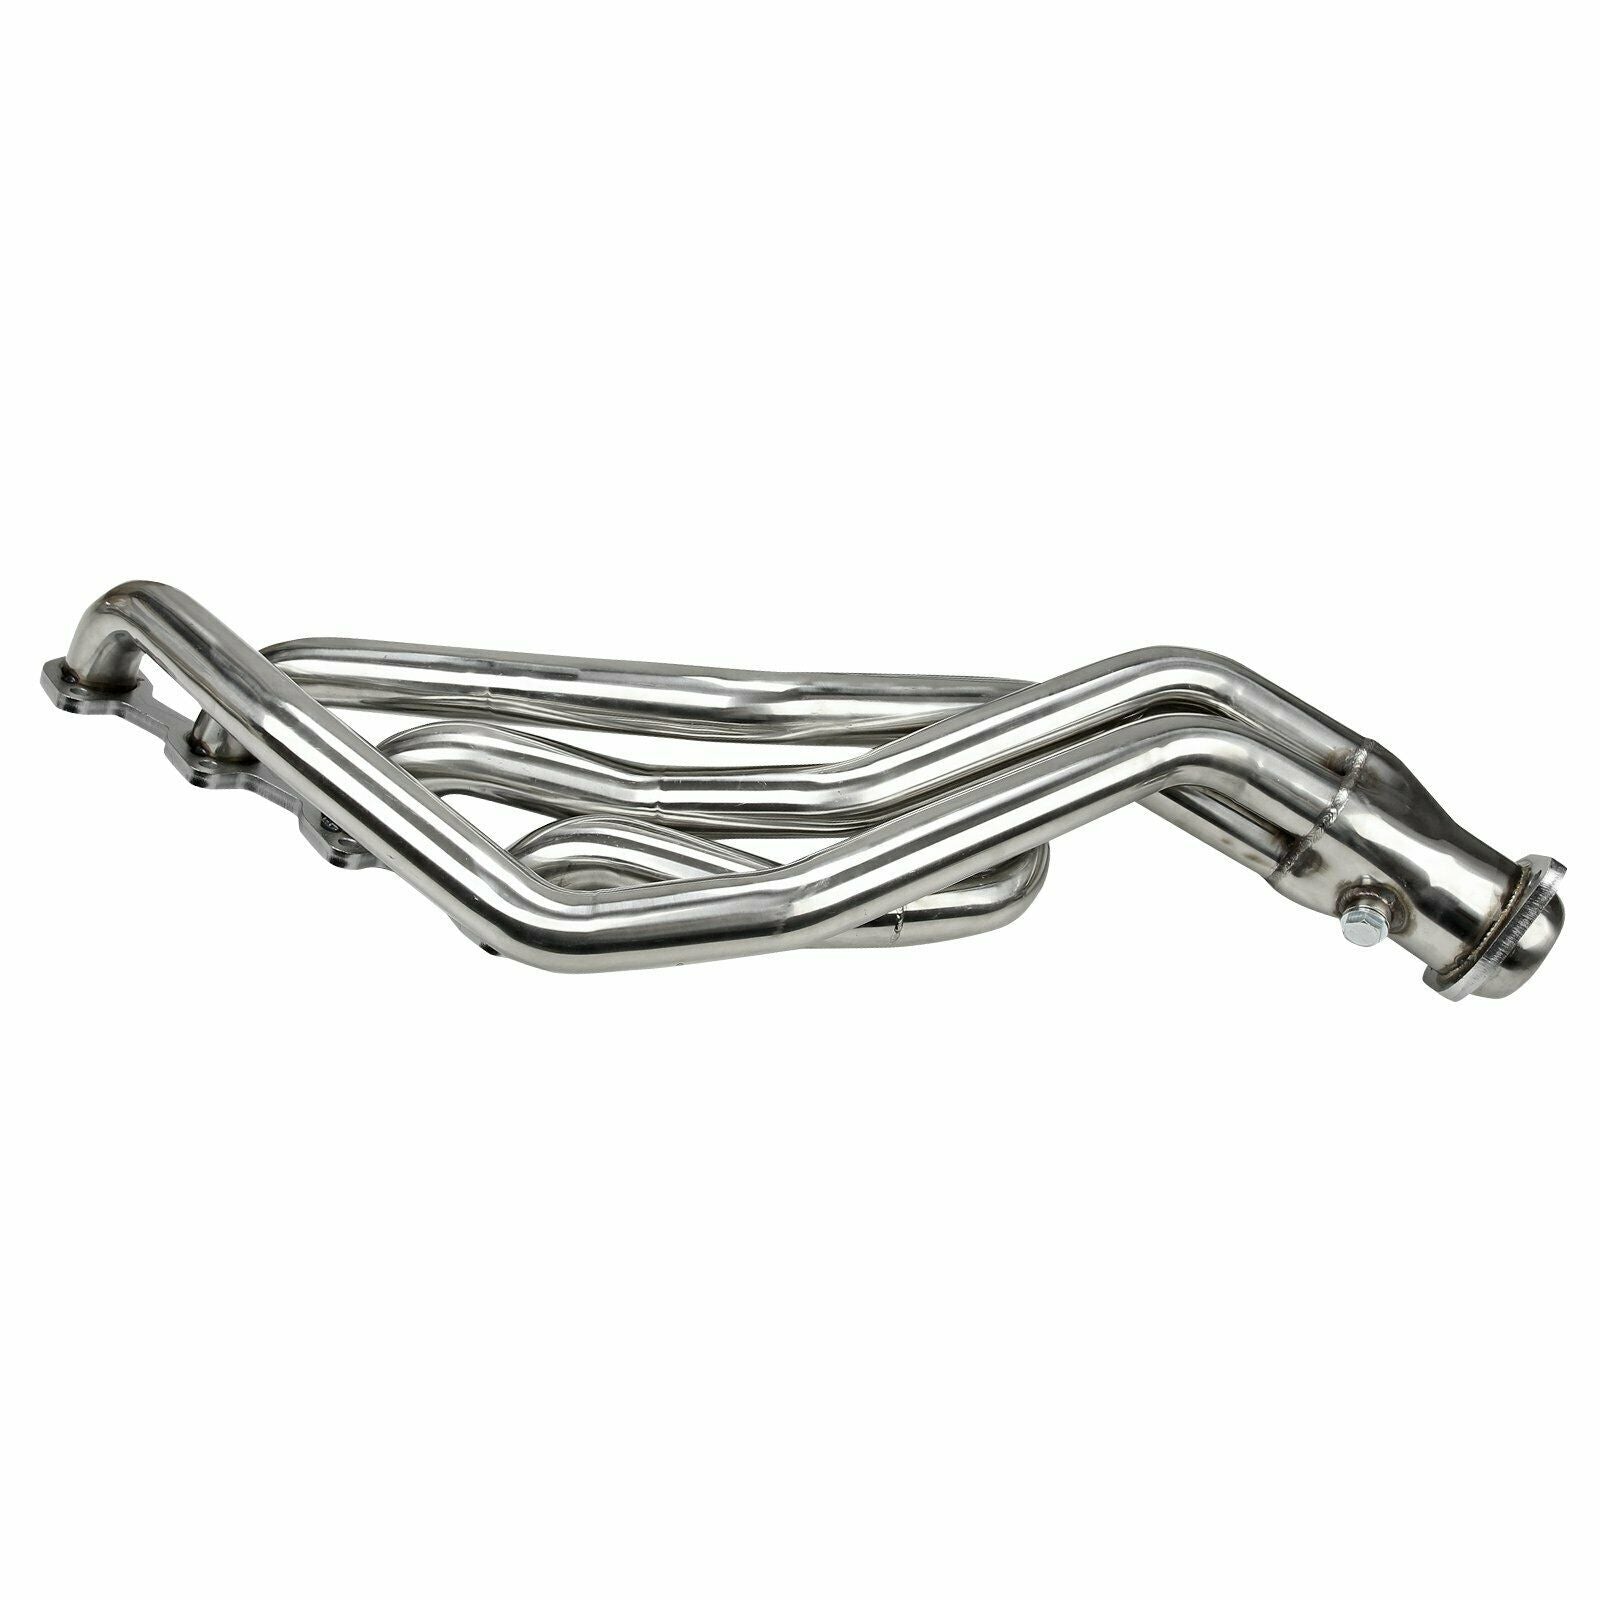 Stainless Steel Exhaust Manifold Header for Ford Mustang GT 4.6 V8 96-04